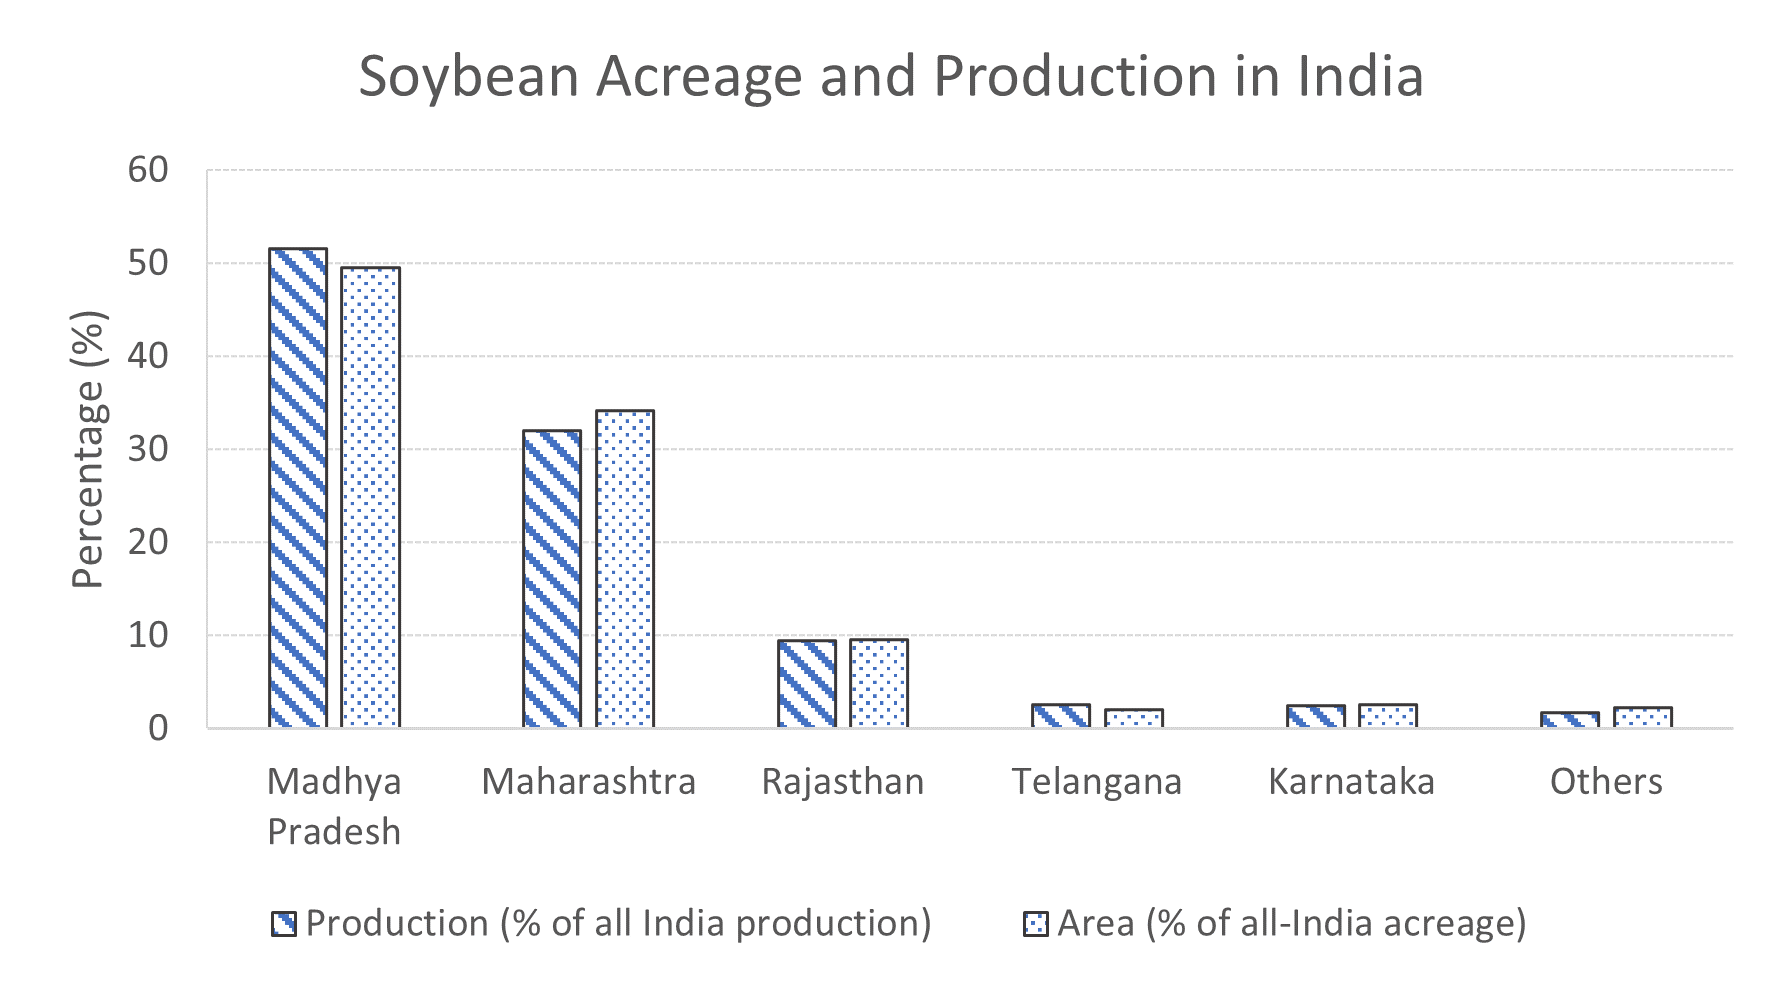 A bar chart showing soybean acreage and production in India by state. Madhya Pradesh and Maharashtra account for around 50% and 30%, respectively, of acreage and production. Rajasthan accounts for about 10%.